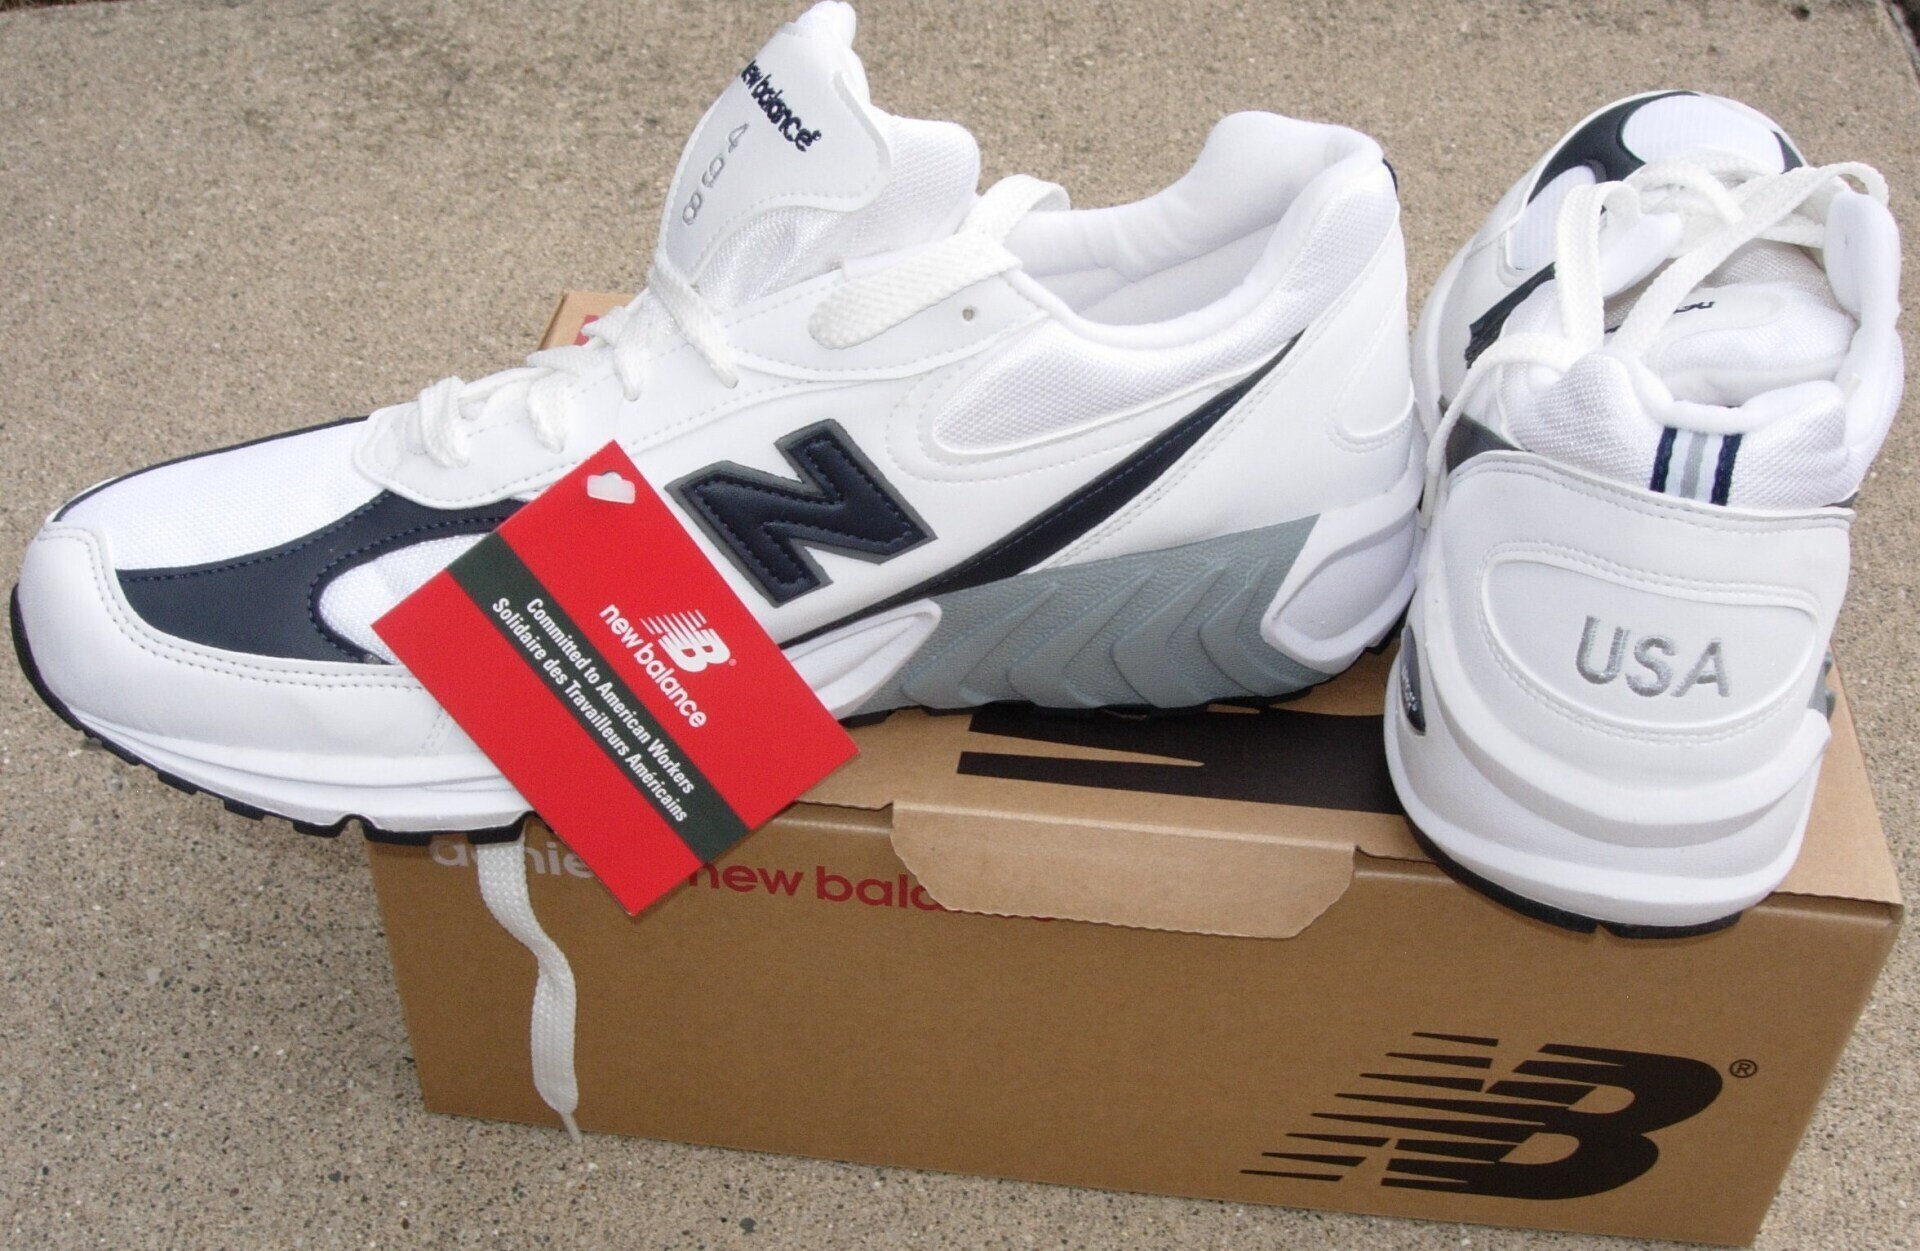 ALL NEW New Balance 498 Trainers Size 12.5 D